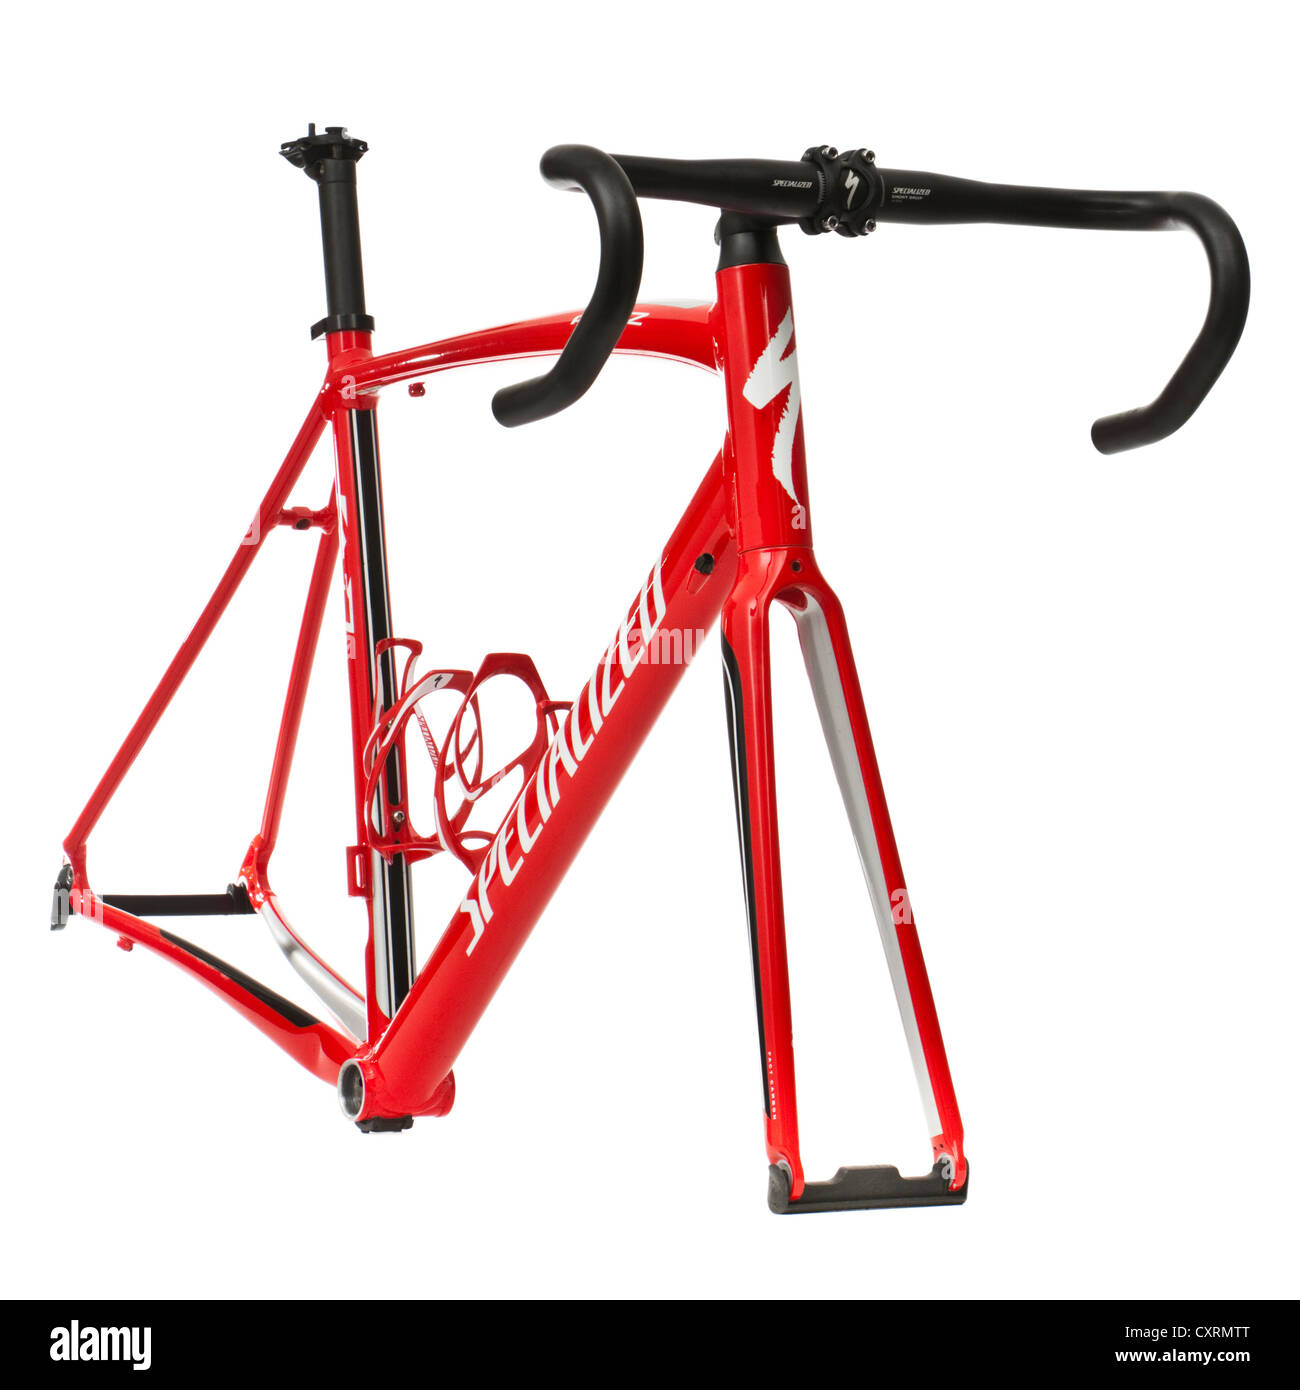 2011 Specialized 'Allez' road racing bicycle frame Stock Photo